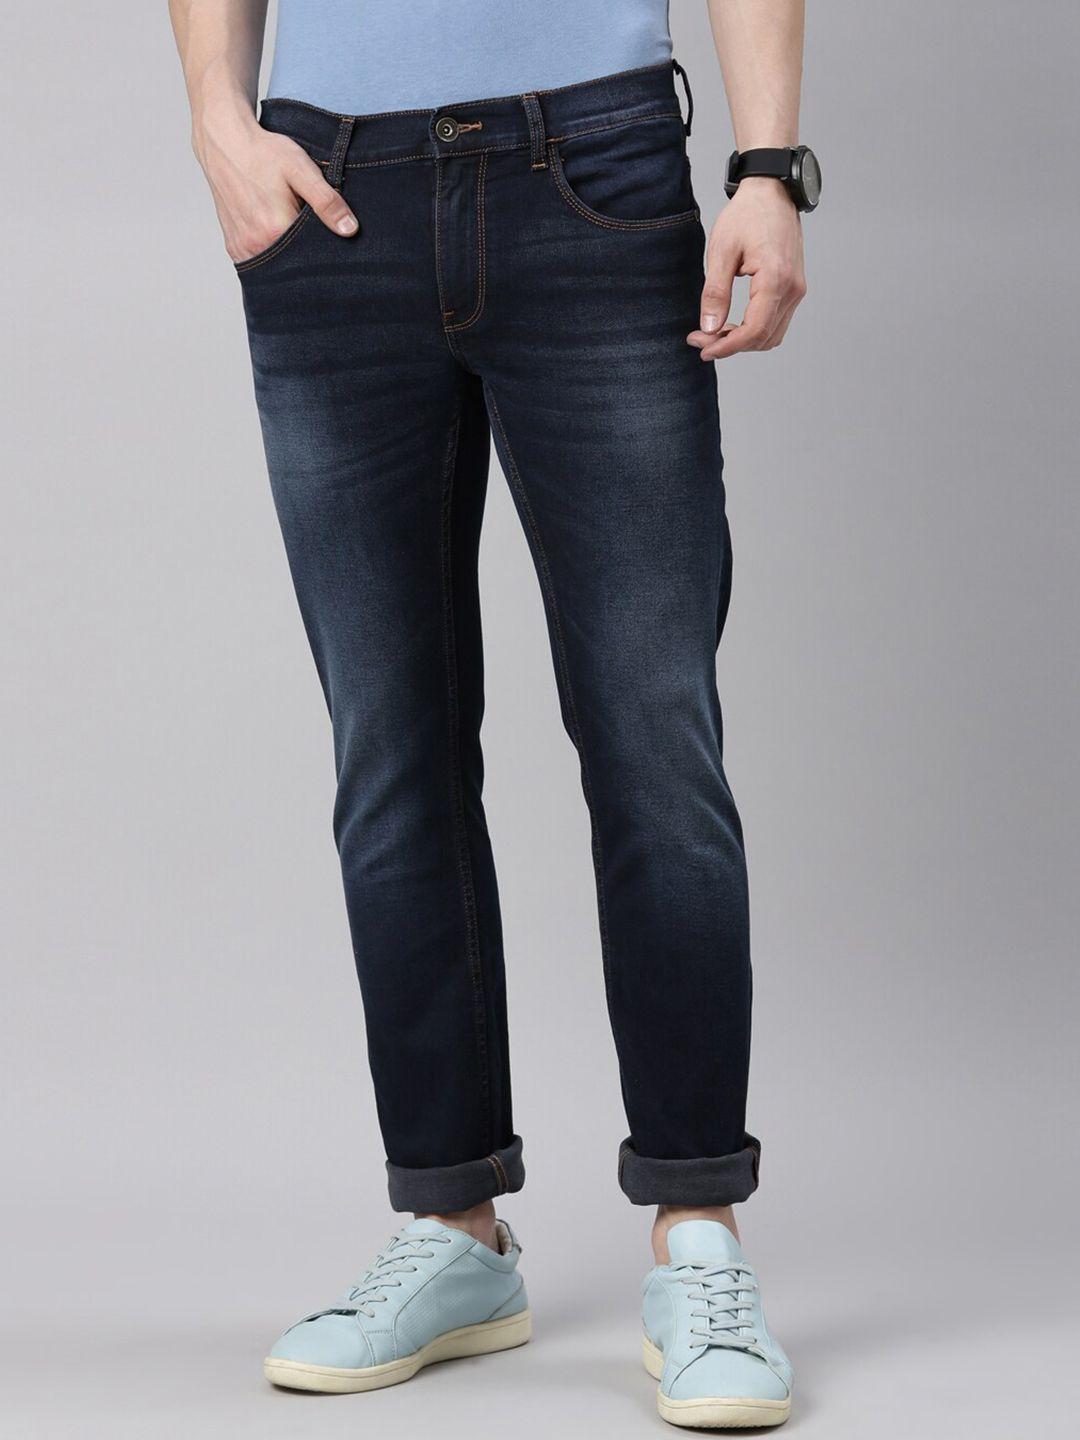 american-bull-men-skinny-fit-light-fade-stretchable-jeans